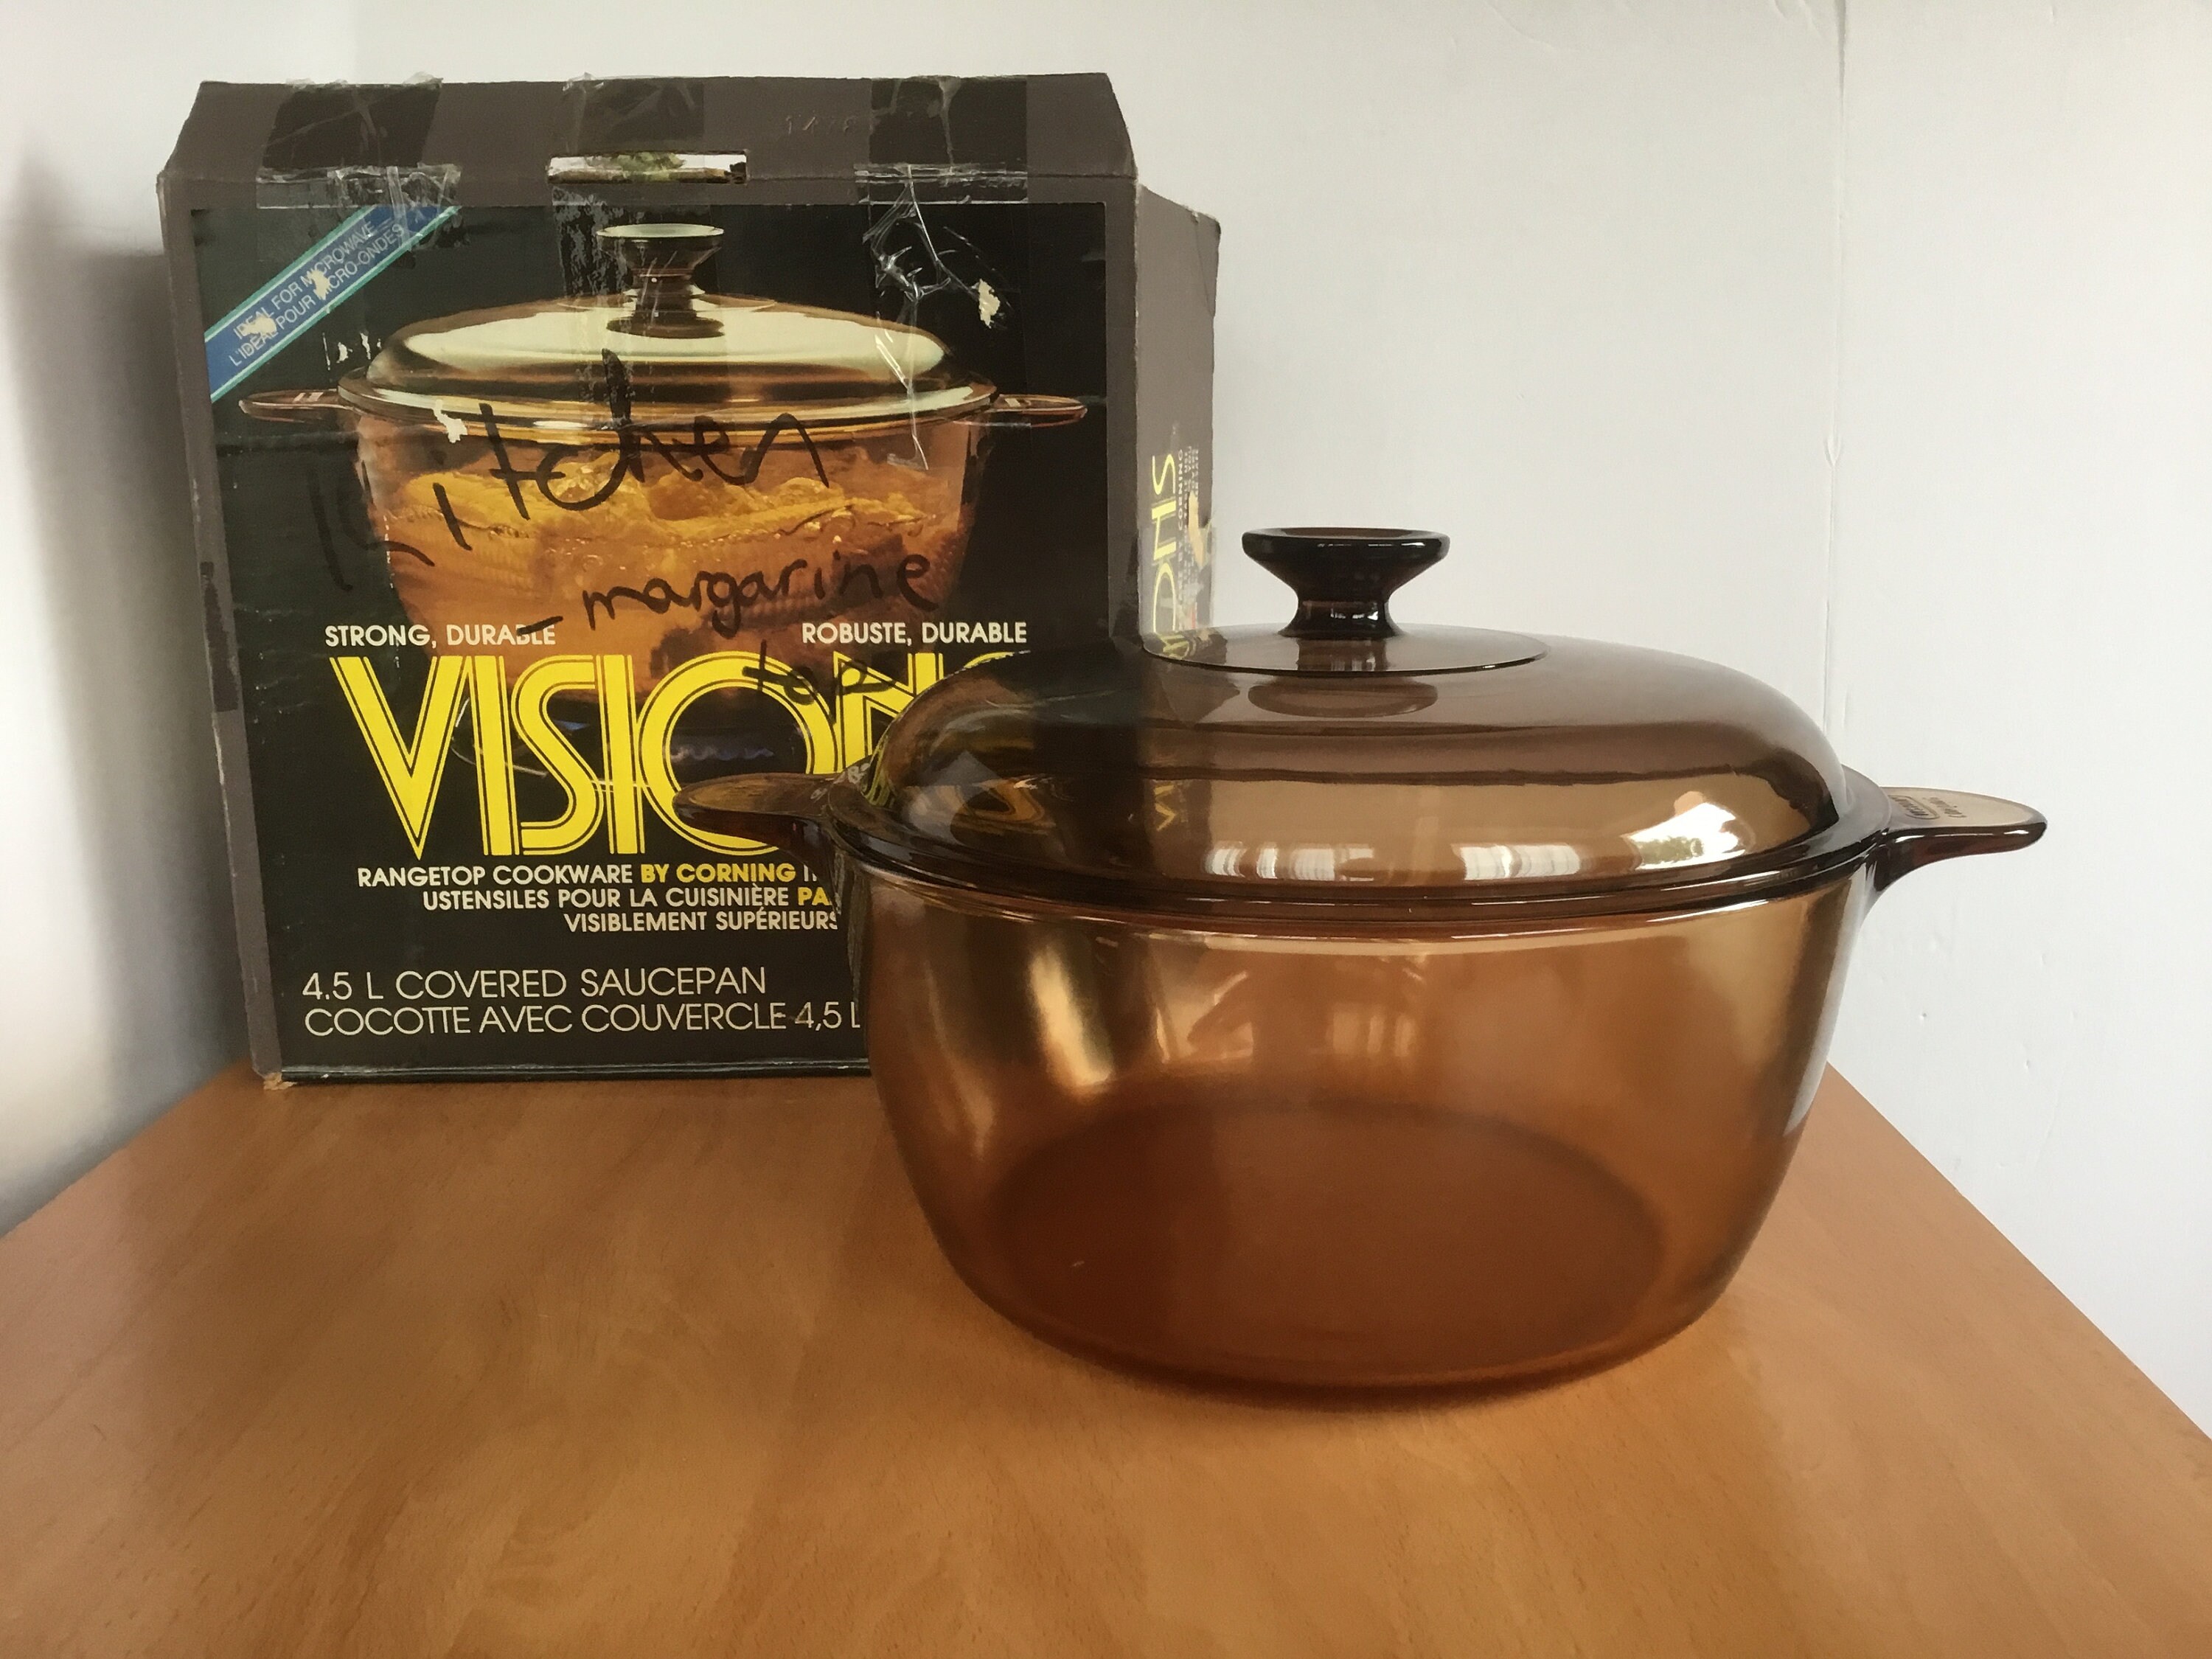 Set of 11 Corning Visions Cookware Set, Amber Brown Glass Bakeware Set With  Lids, Vintage Pyrex, Bake Ware, Vision Ware Pots and Pans, 2.5 L 